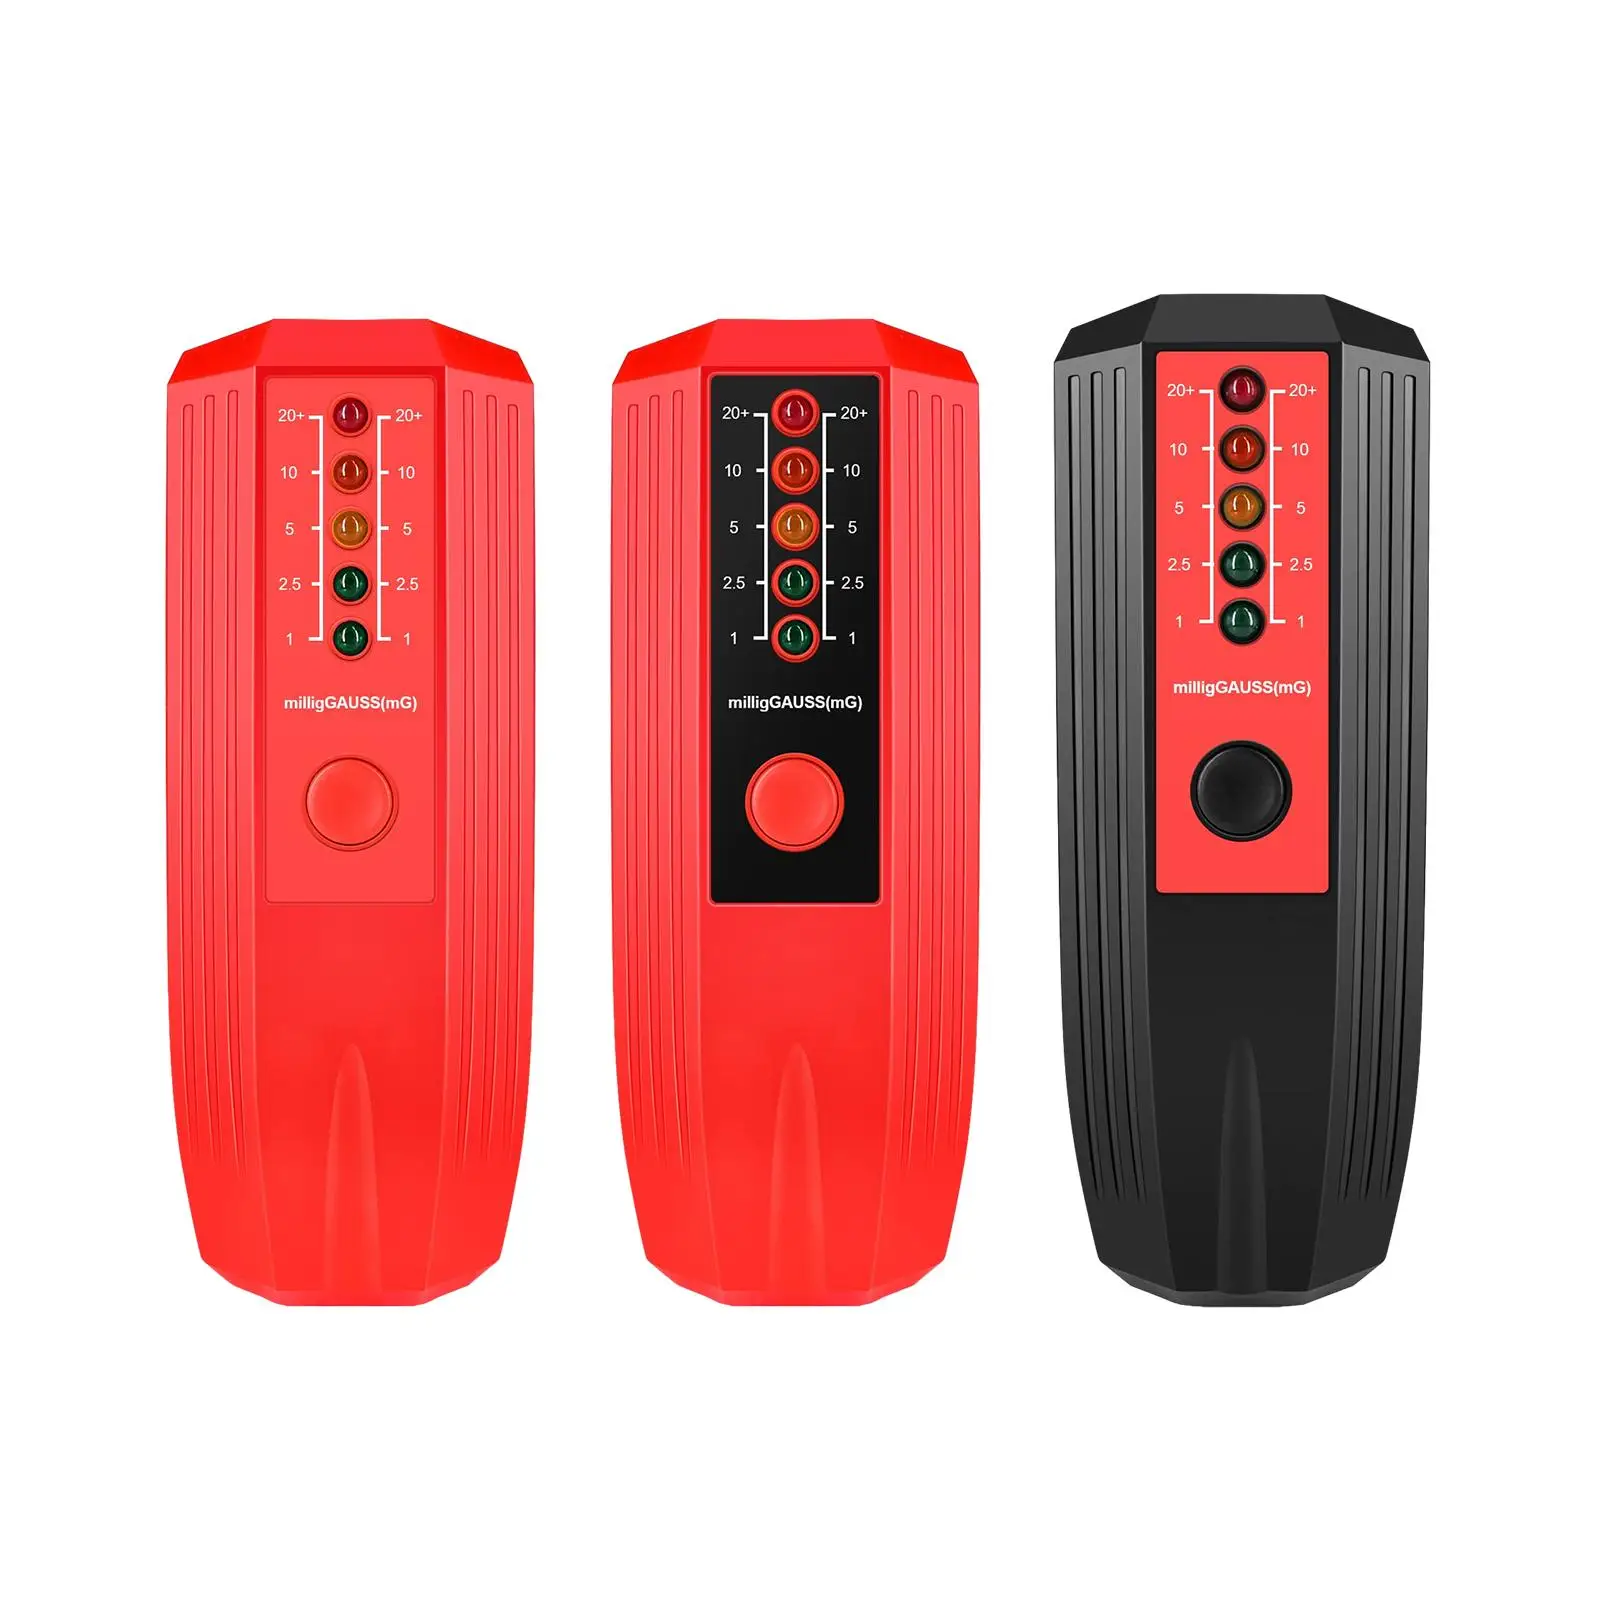 Electromagnetic Tester Handheld with LED Indicator Light for Industry Nuclear Electromagnetic Field Outdoor